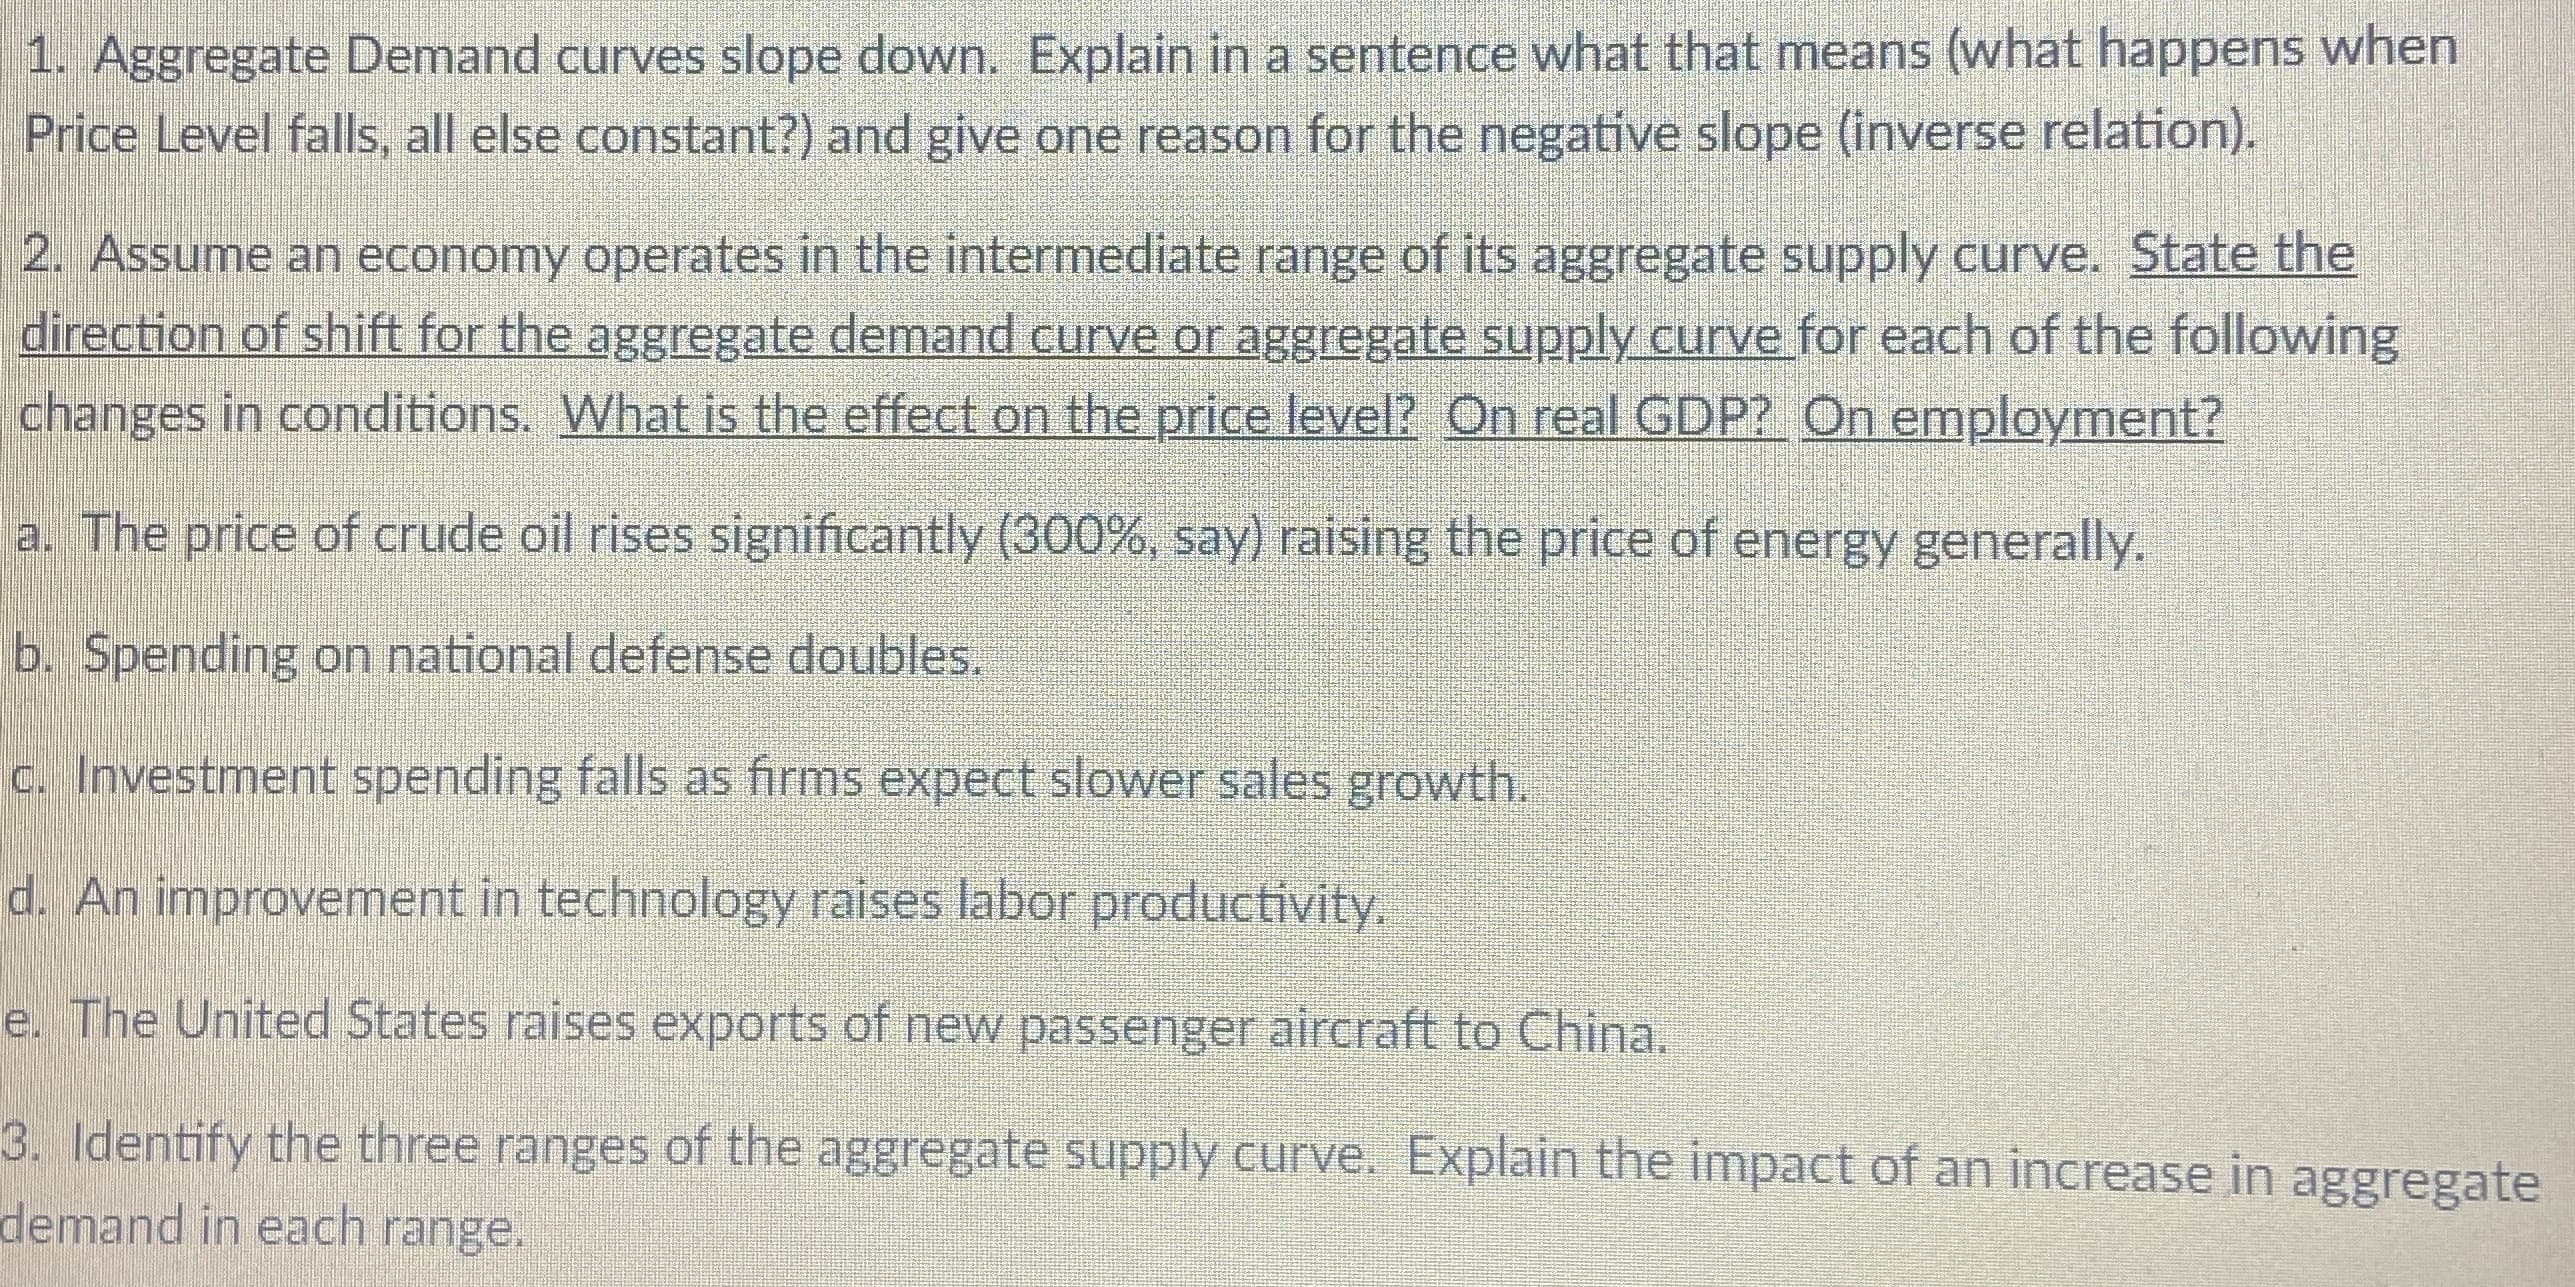 1. Aggregate Demand curves slope down. Explain in a sentence what that means (what happens when
Price Level falls, all else constant?) and give one reason for the negative slope (inverse relation).
2. Assume an economy operates in the intermediate range of its aggregate supply curve. State the
direction of shift for the aggregate demand curve or aggregate supply curve for each of the following
changes in conditions. What is the effect on the price level? On real GDP? On employment?
a. The price of crude oil rises significantly (300%. say) raising the price of energy generally.
b. Spending on national defense doubles.
c. Investment spending falls as firms expect slower sales growth.
d. An improvement in technology raises labor productivity.
e. The United States raises exports of new passenger aircraft to China.
3. Identify the three ranges of the aggregate supply curve. Explain the impact of an increase in aggregate
demand in each range.
